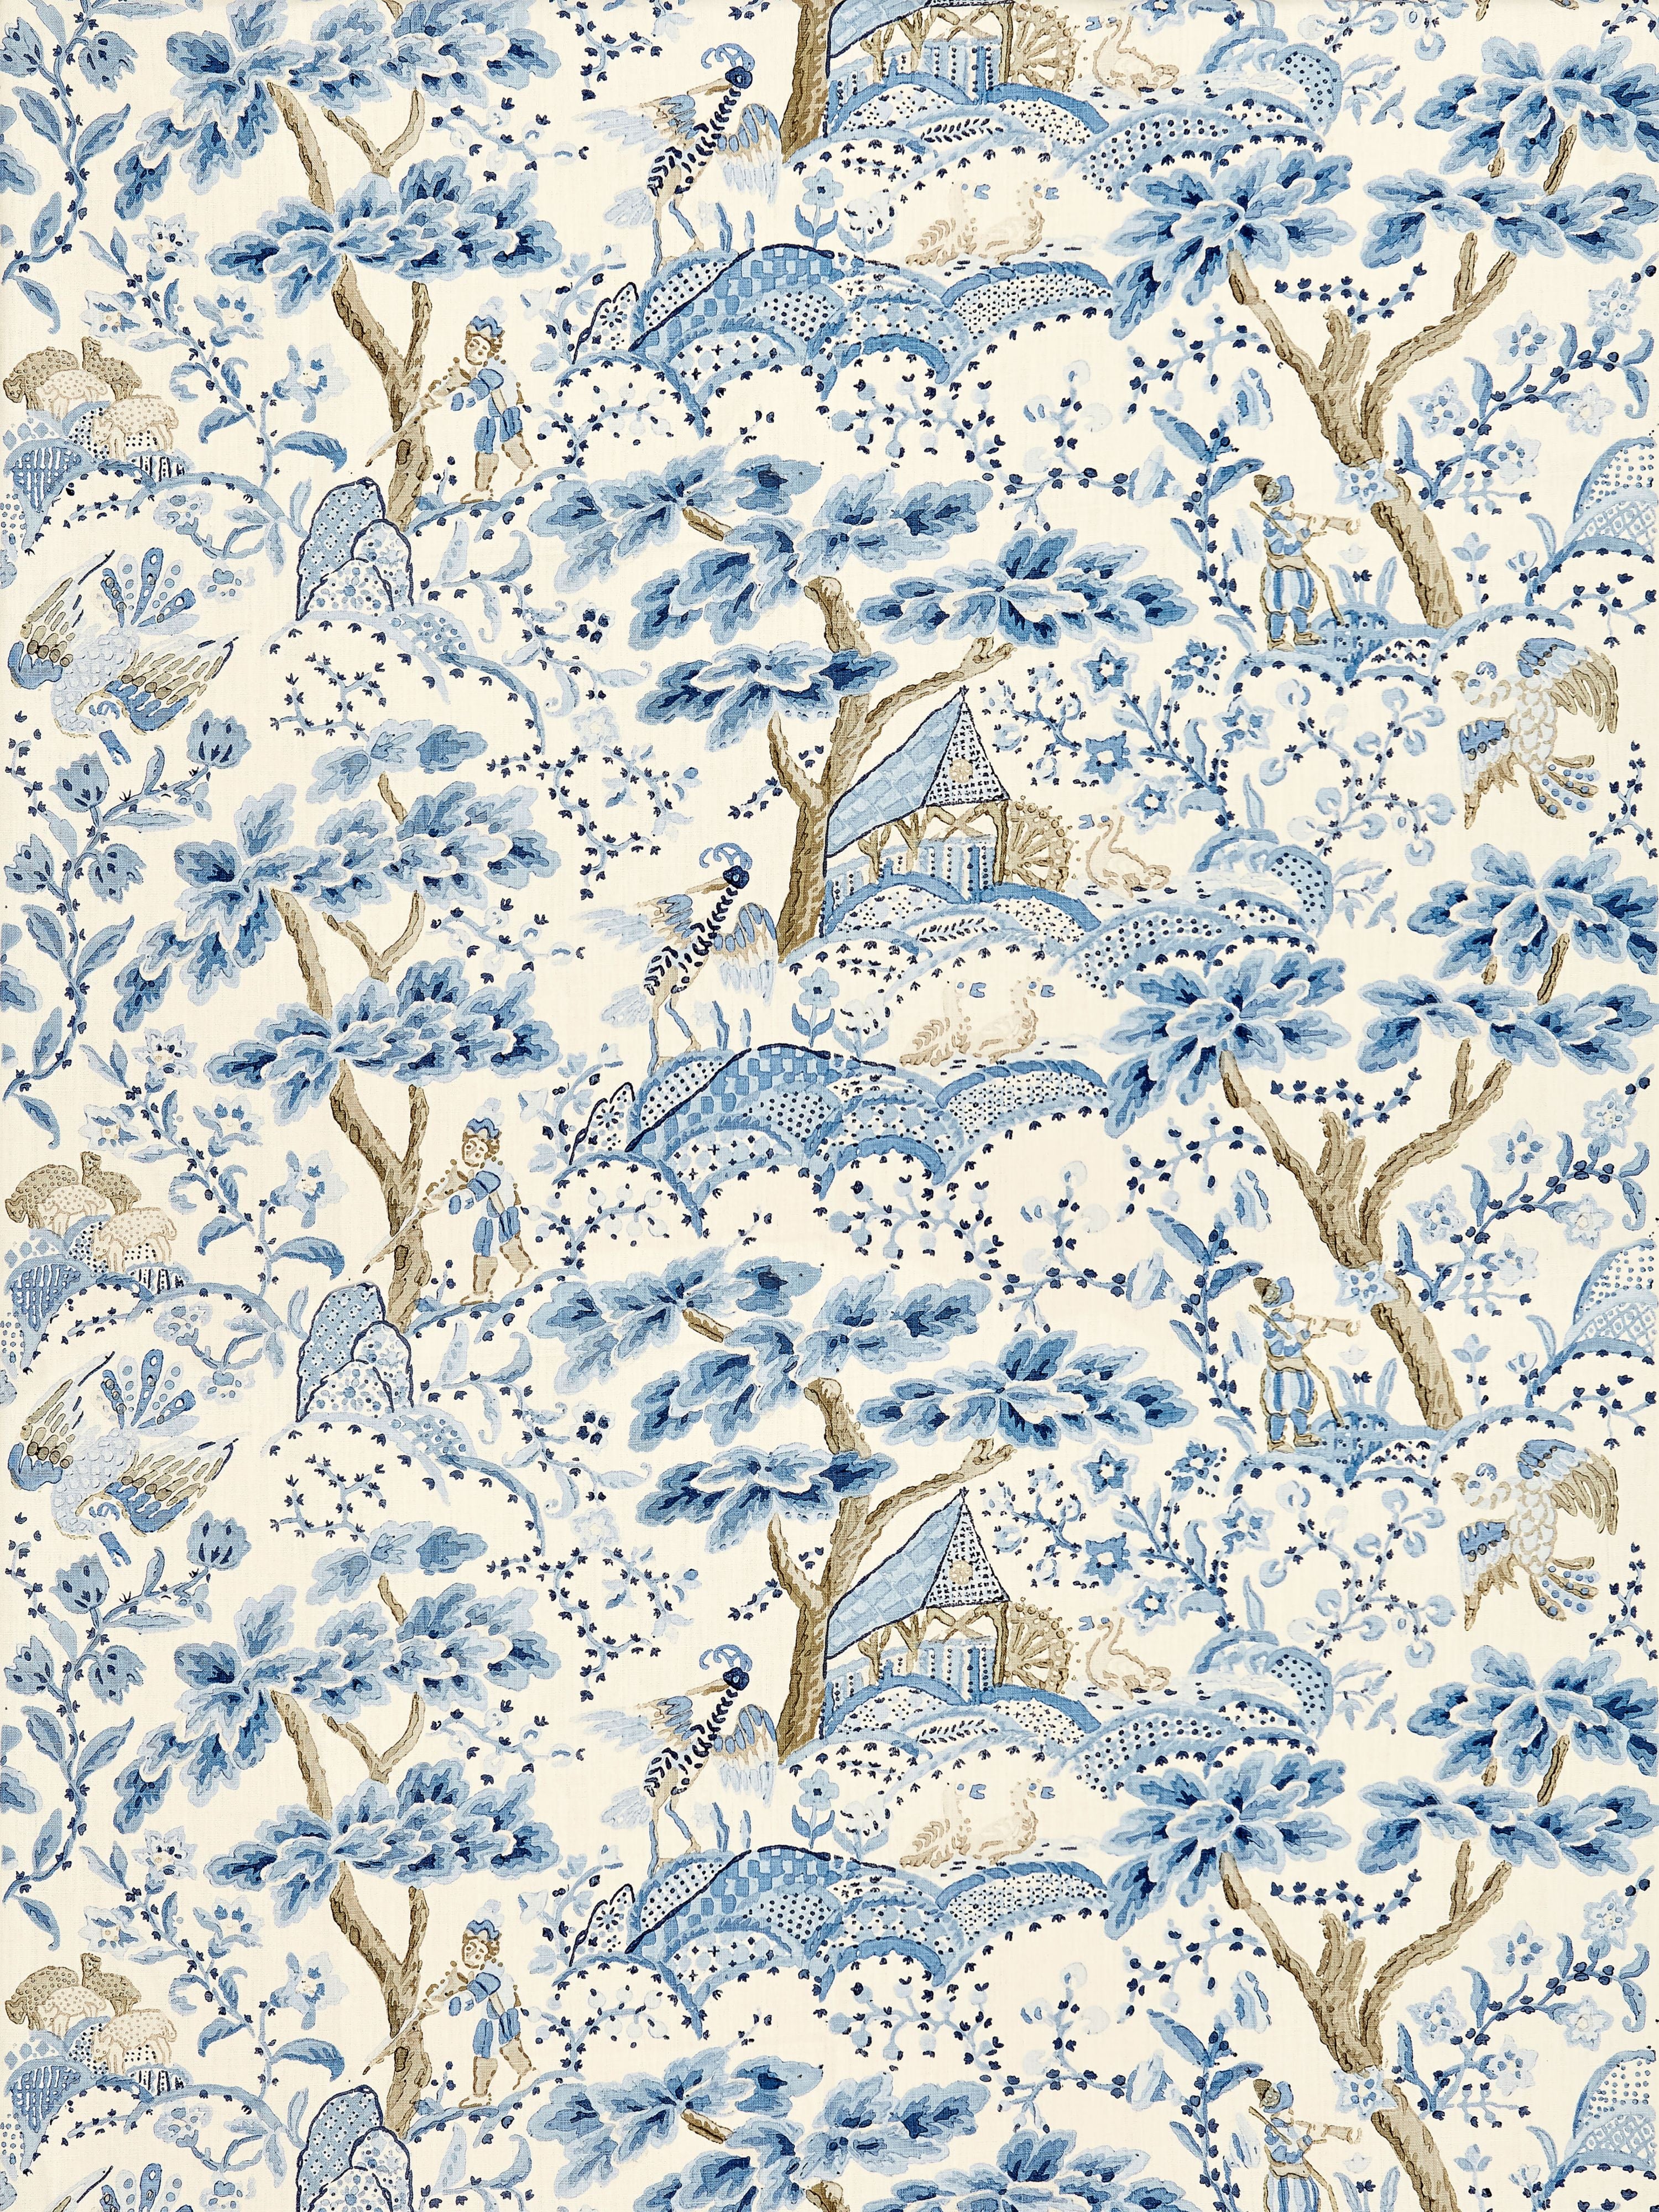 Kelmescott Hand Block Print fabric in porcelain color - pattern number SC 000116590 - by Scalamandre in the Scalamandre Fabrics Book 1 collection